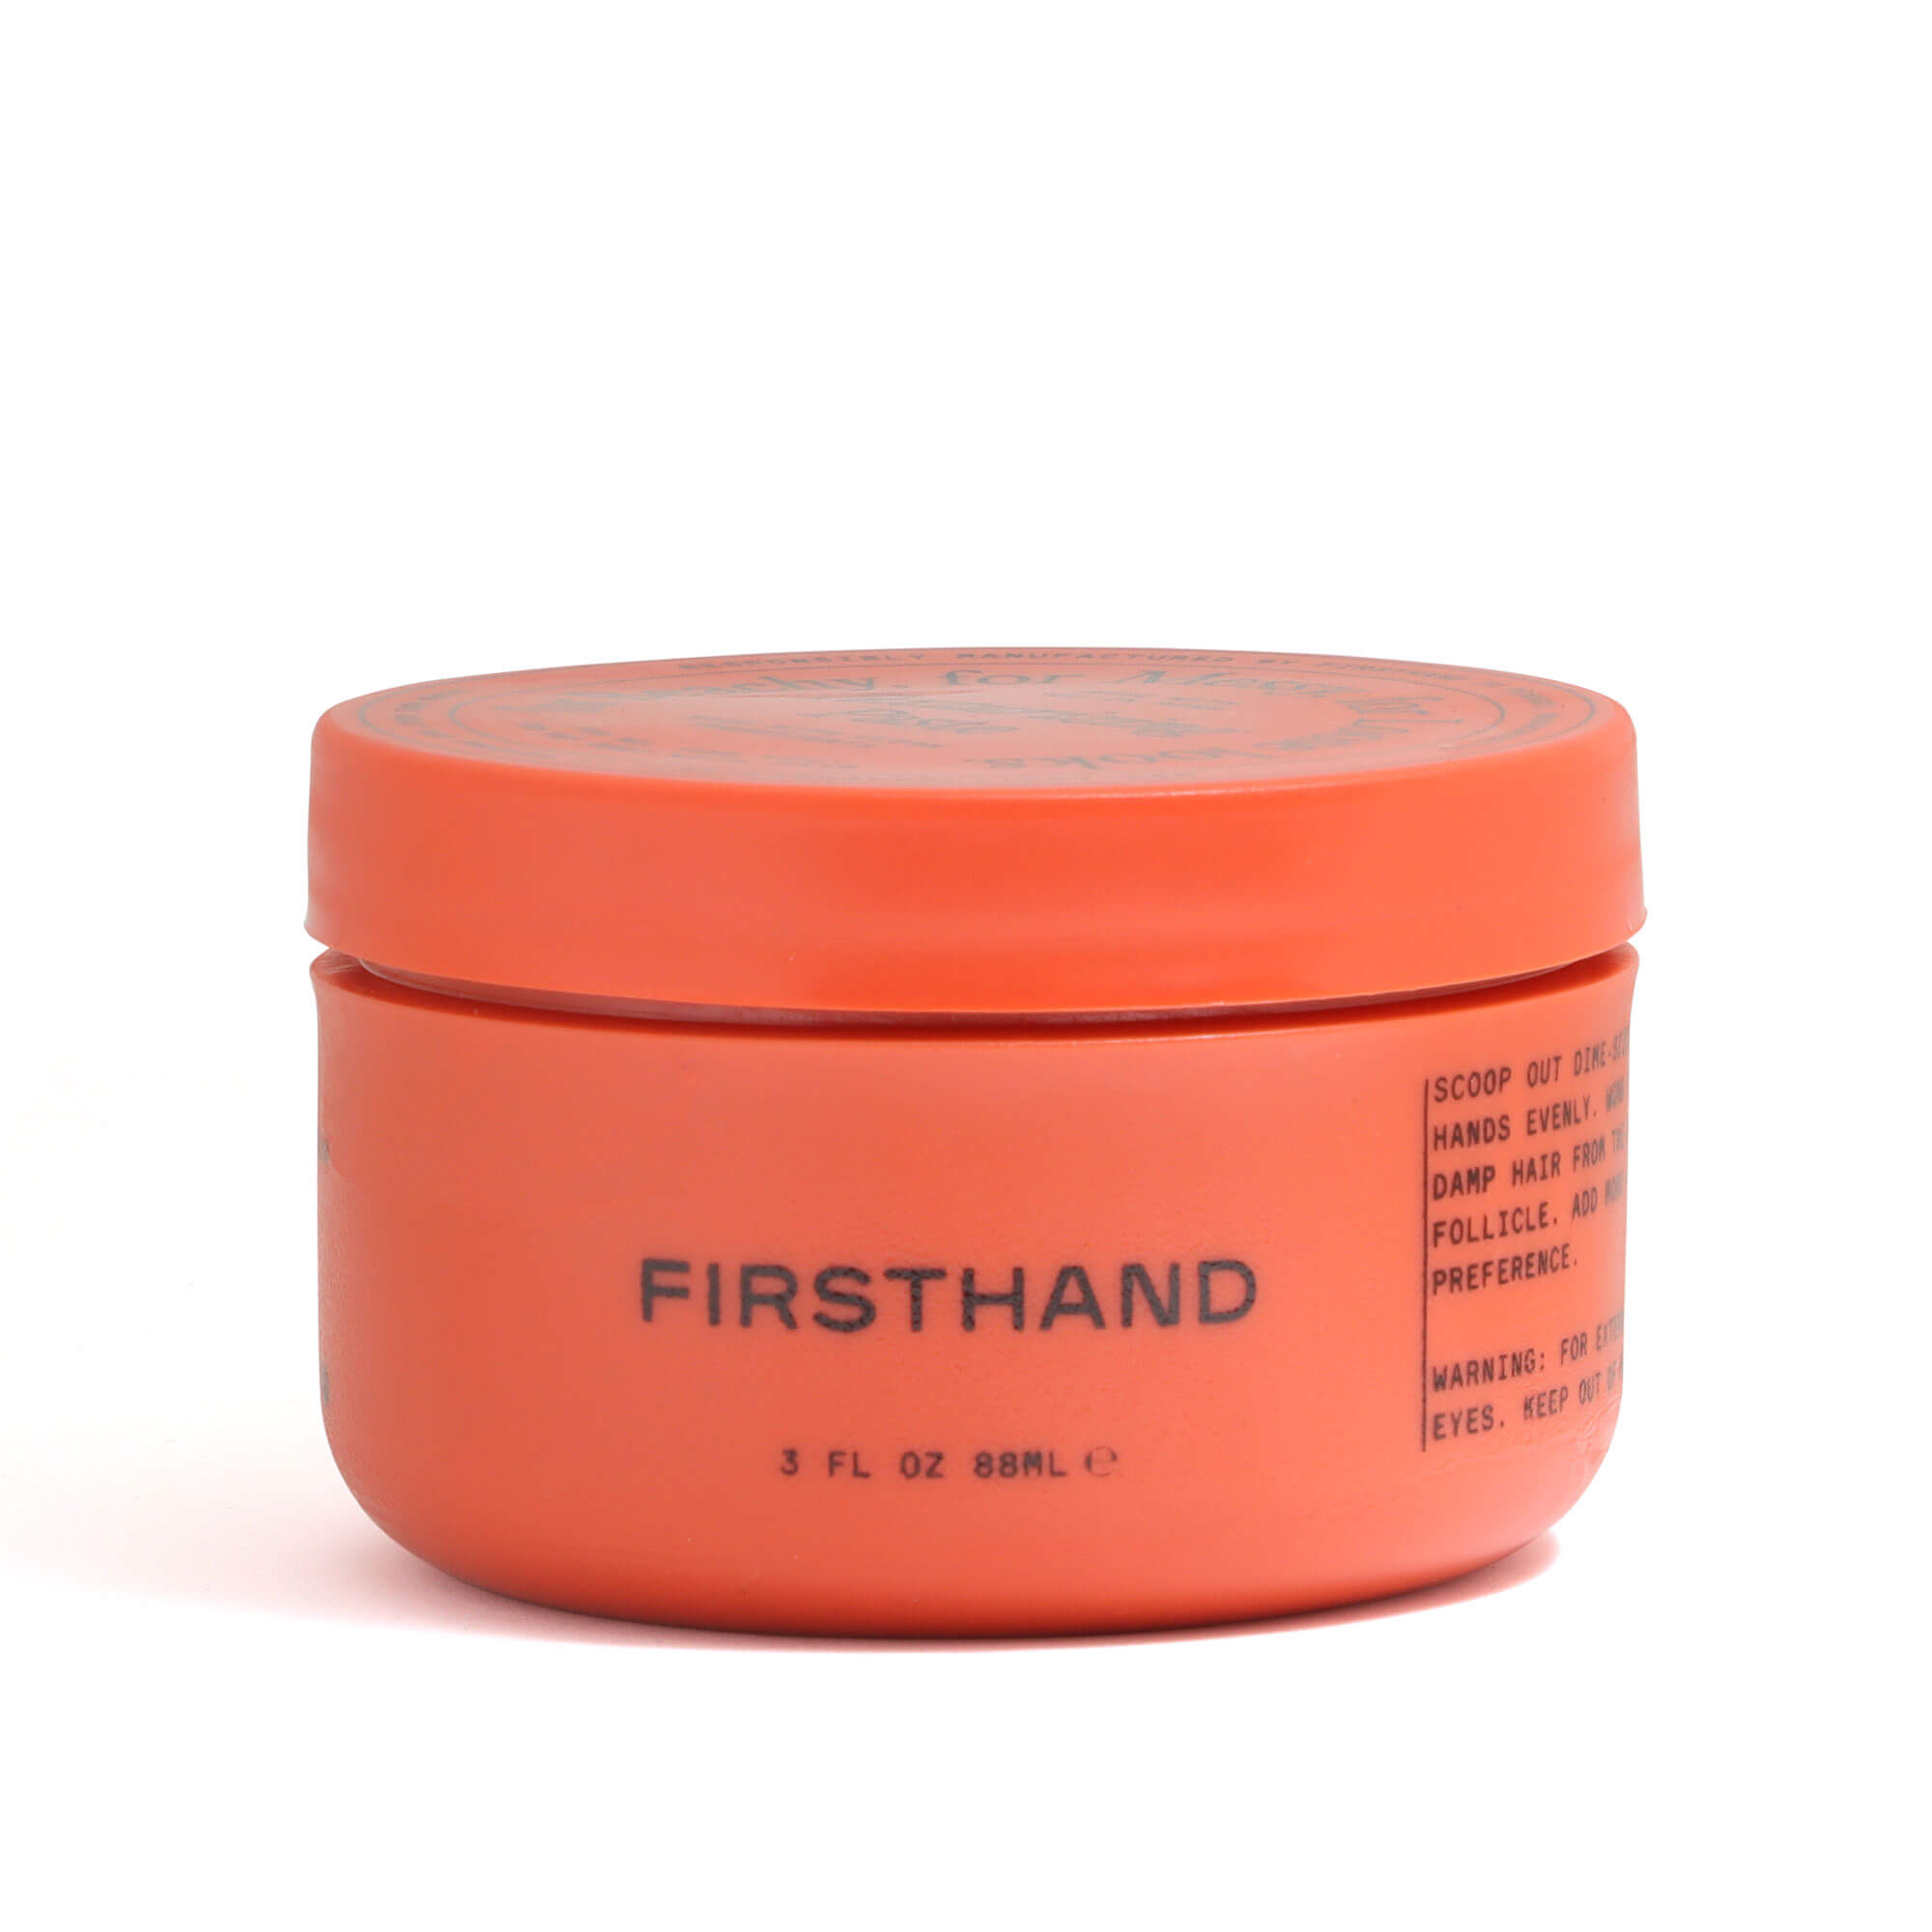 Firsthand Texturising Paste